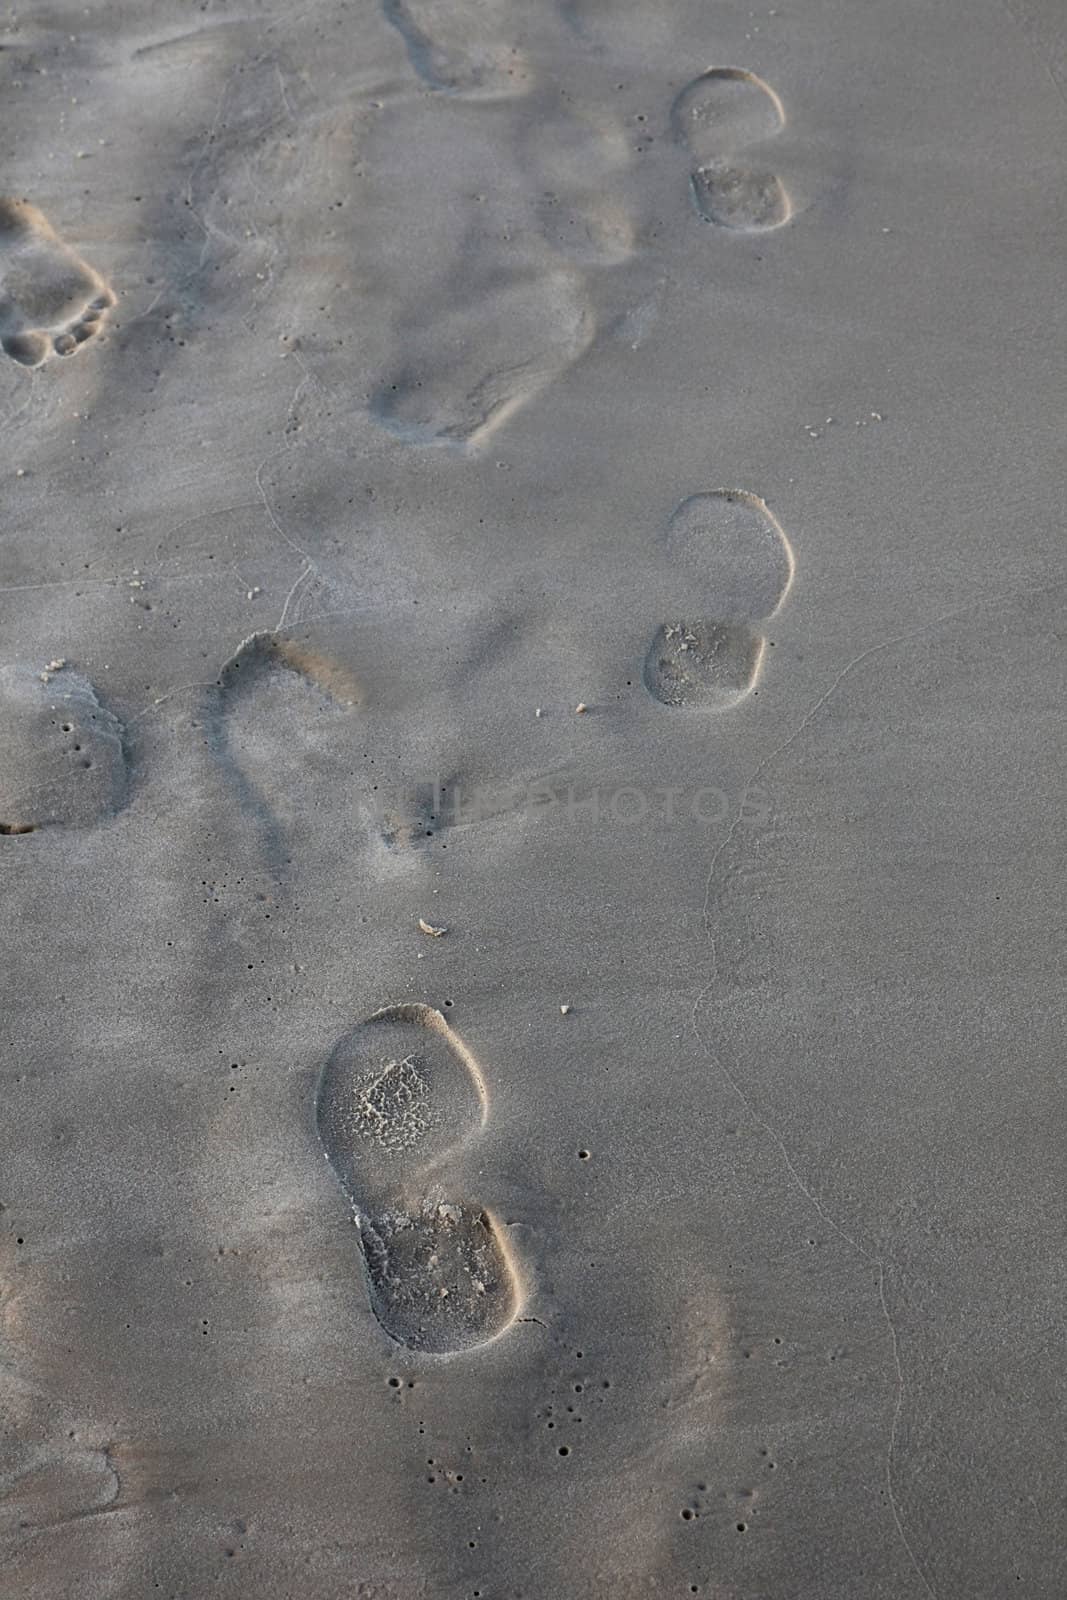 Human trace of a foot on sand